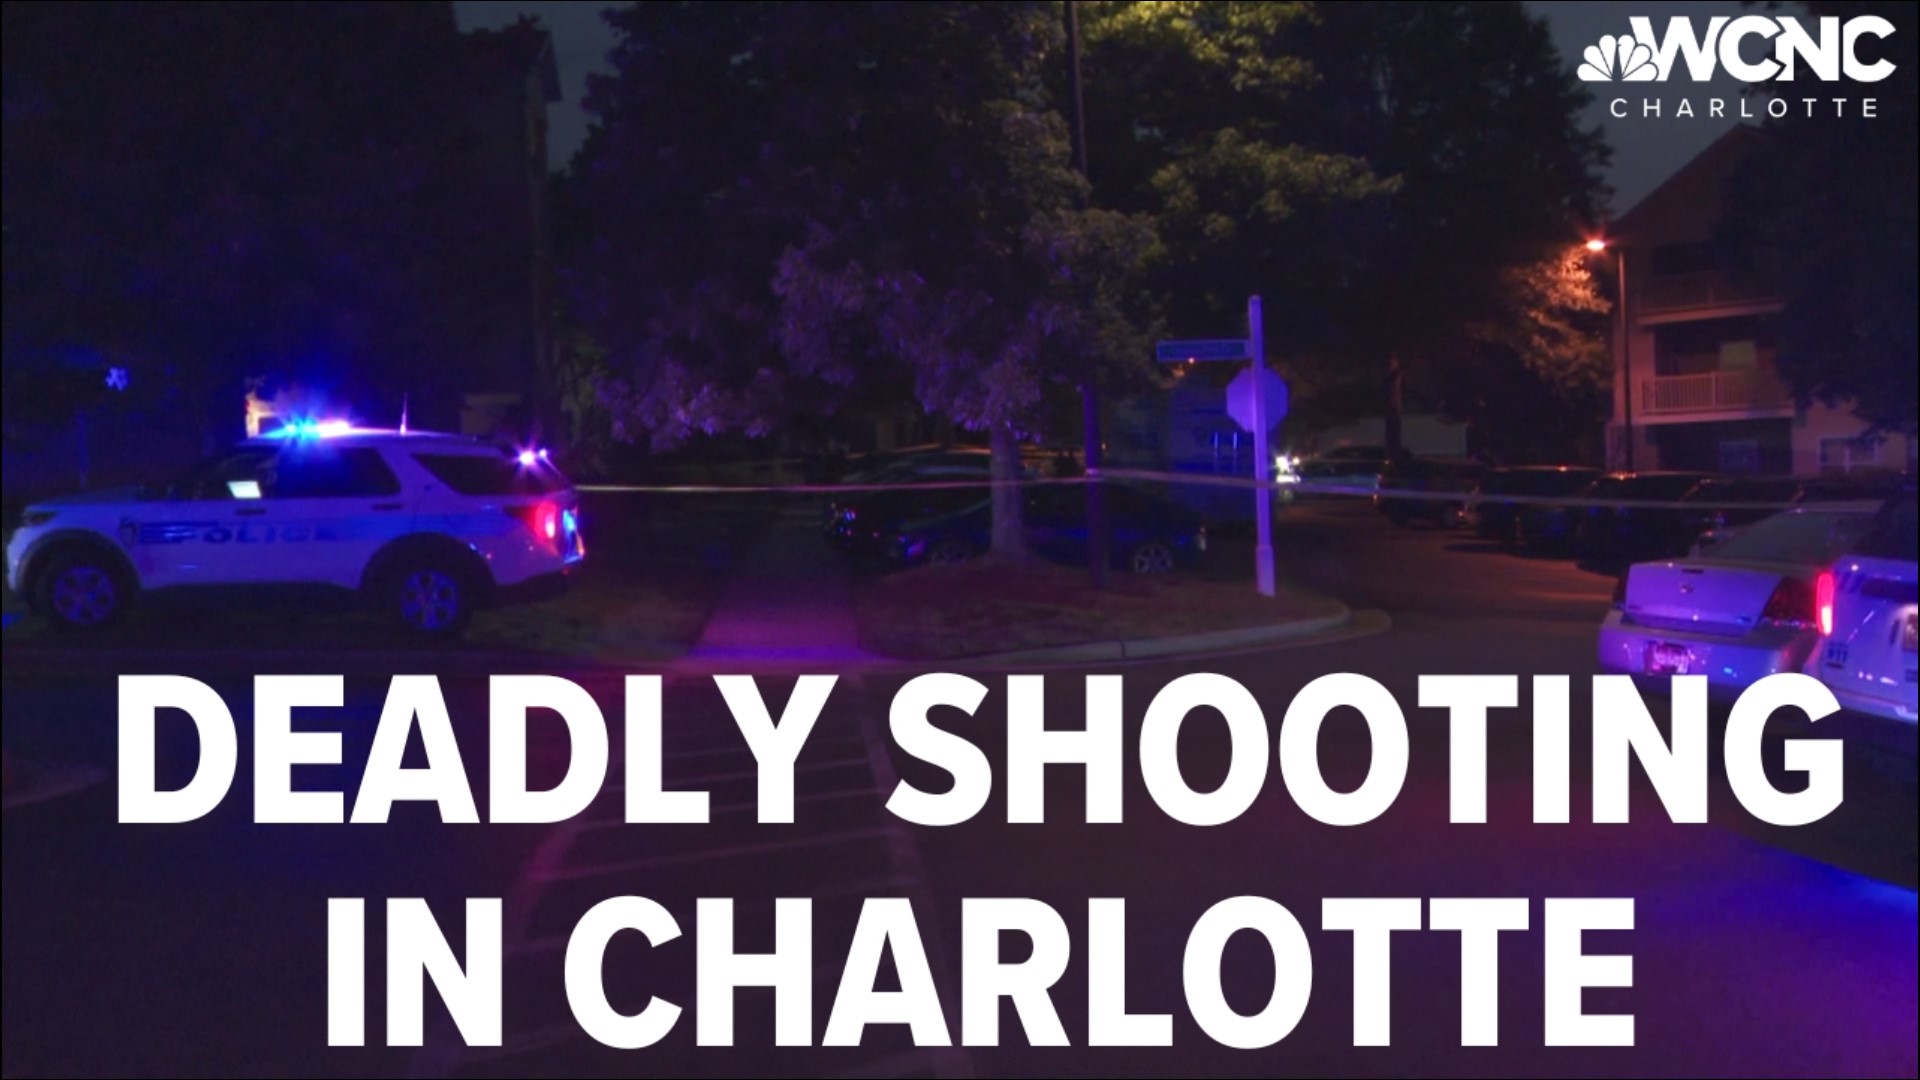 A homicide is under investigation in north Charlotte, police said Monday.